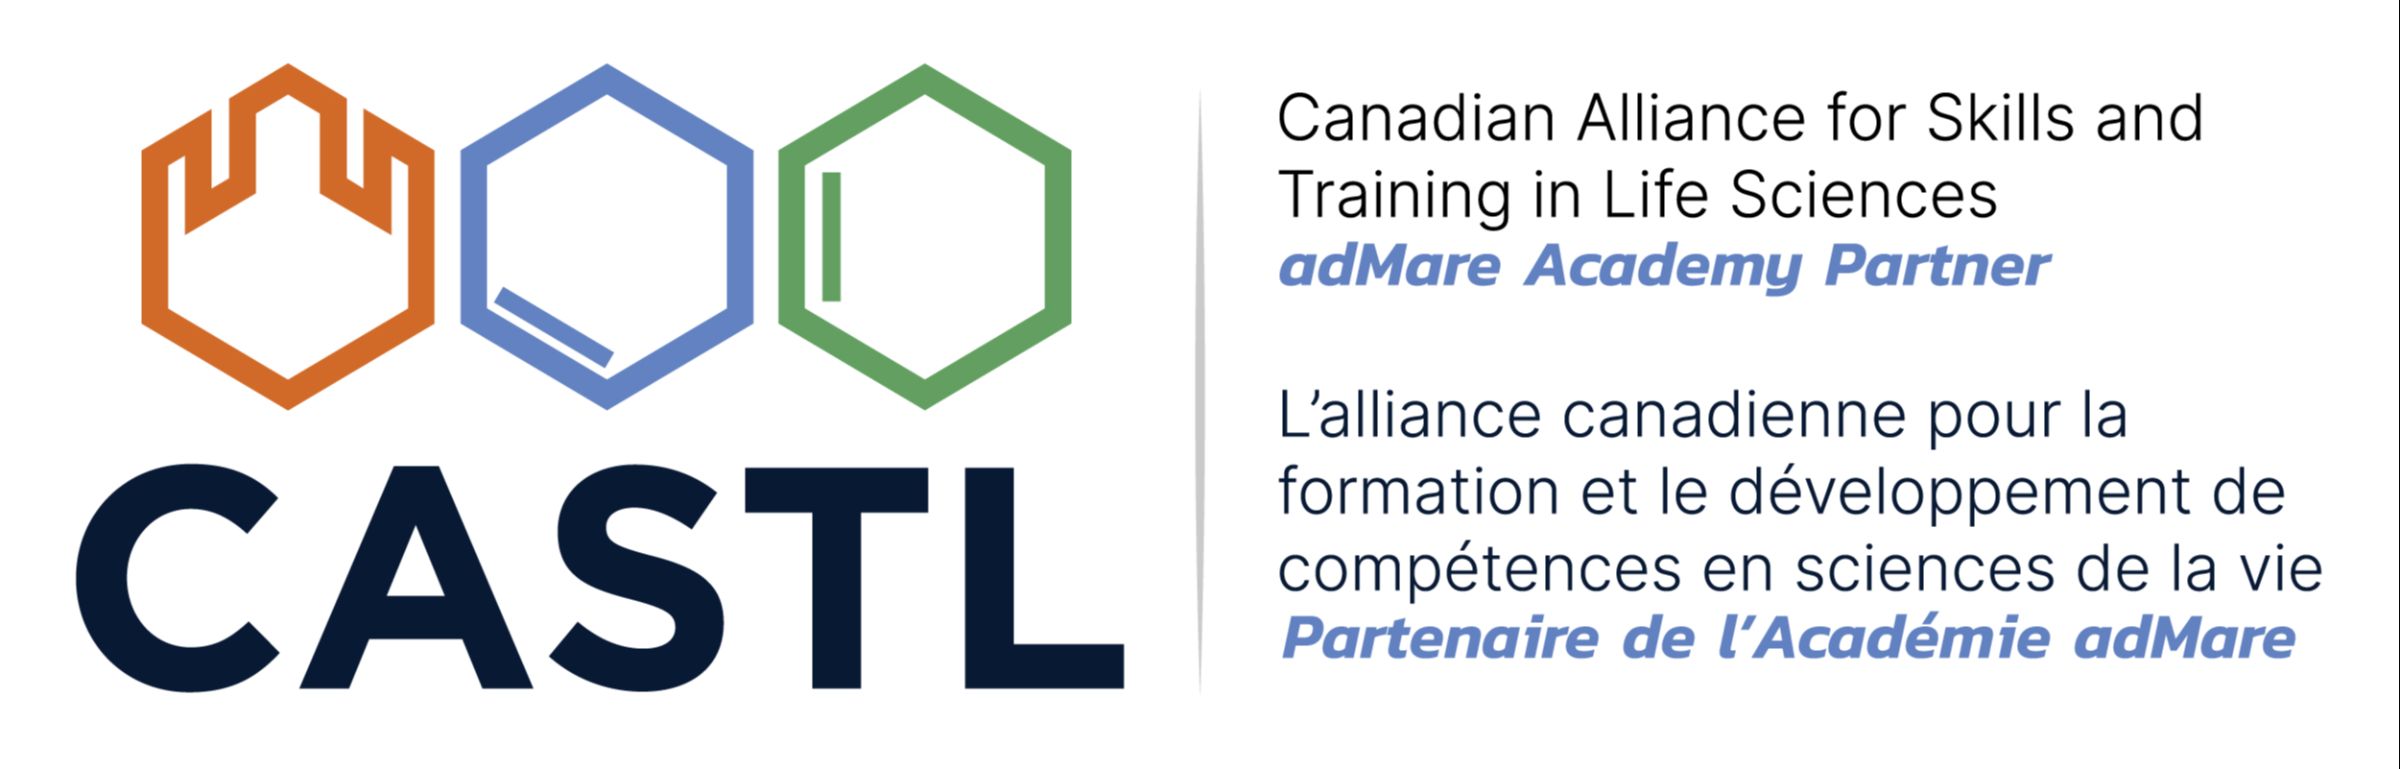 The Canadian Alliance for Skills and Training in Life Sciences (CASTL) launches 2023 Short Course Calendar